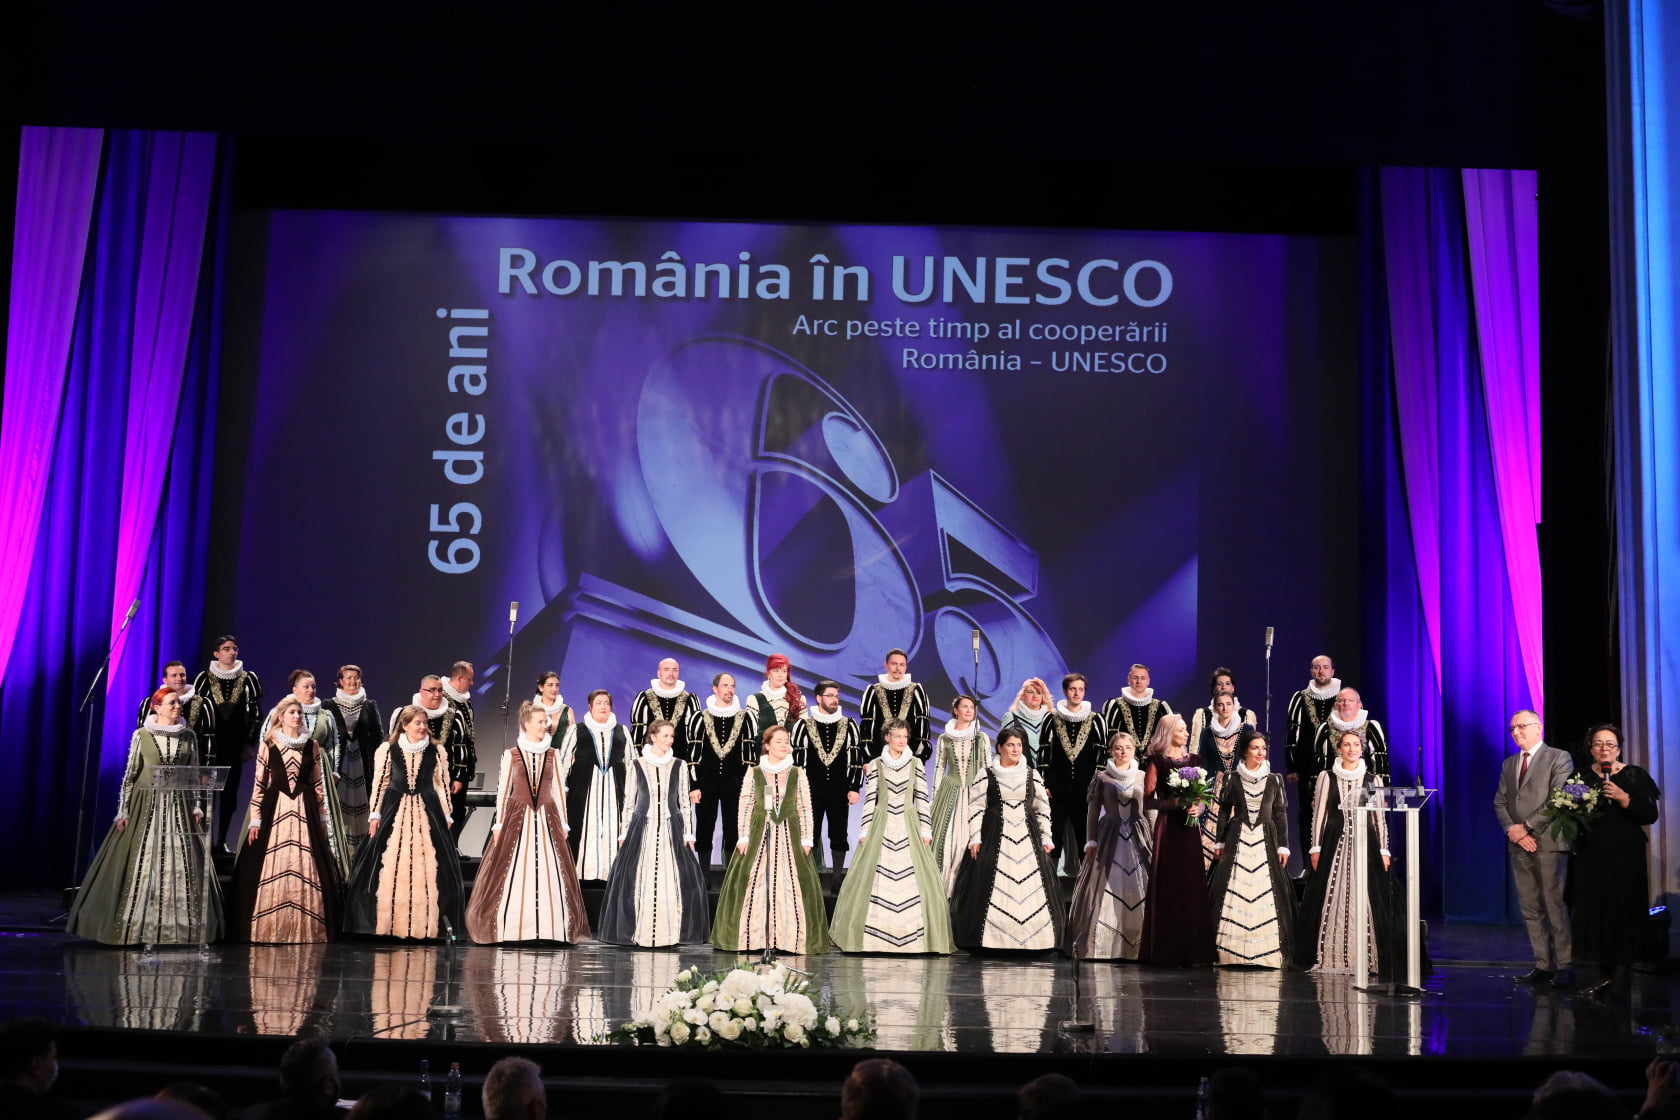 The 41st regular session of the UNESCO General Conference